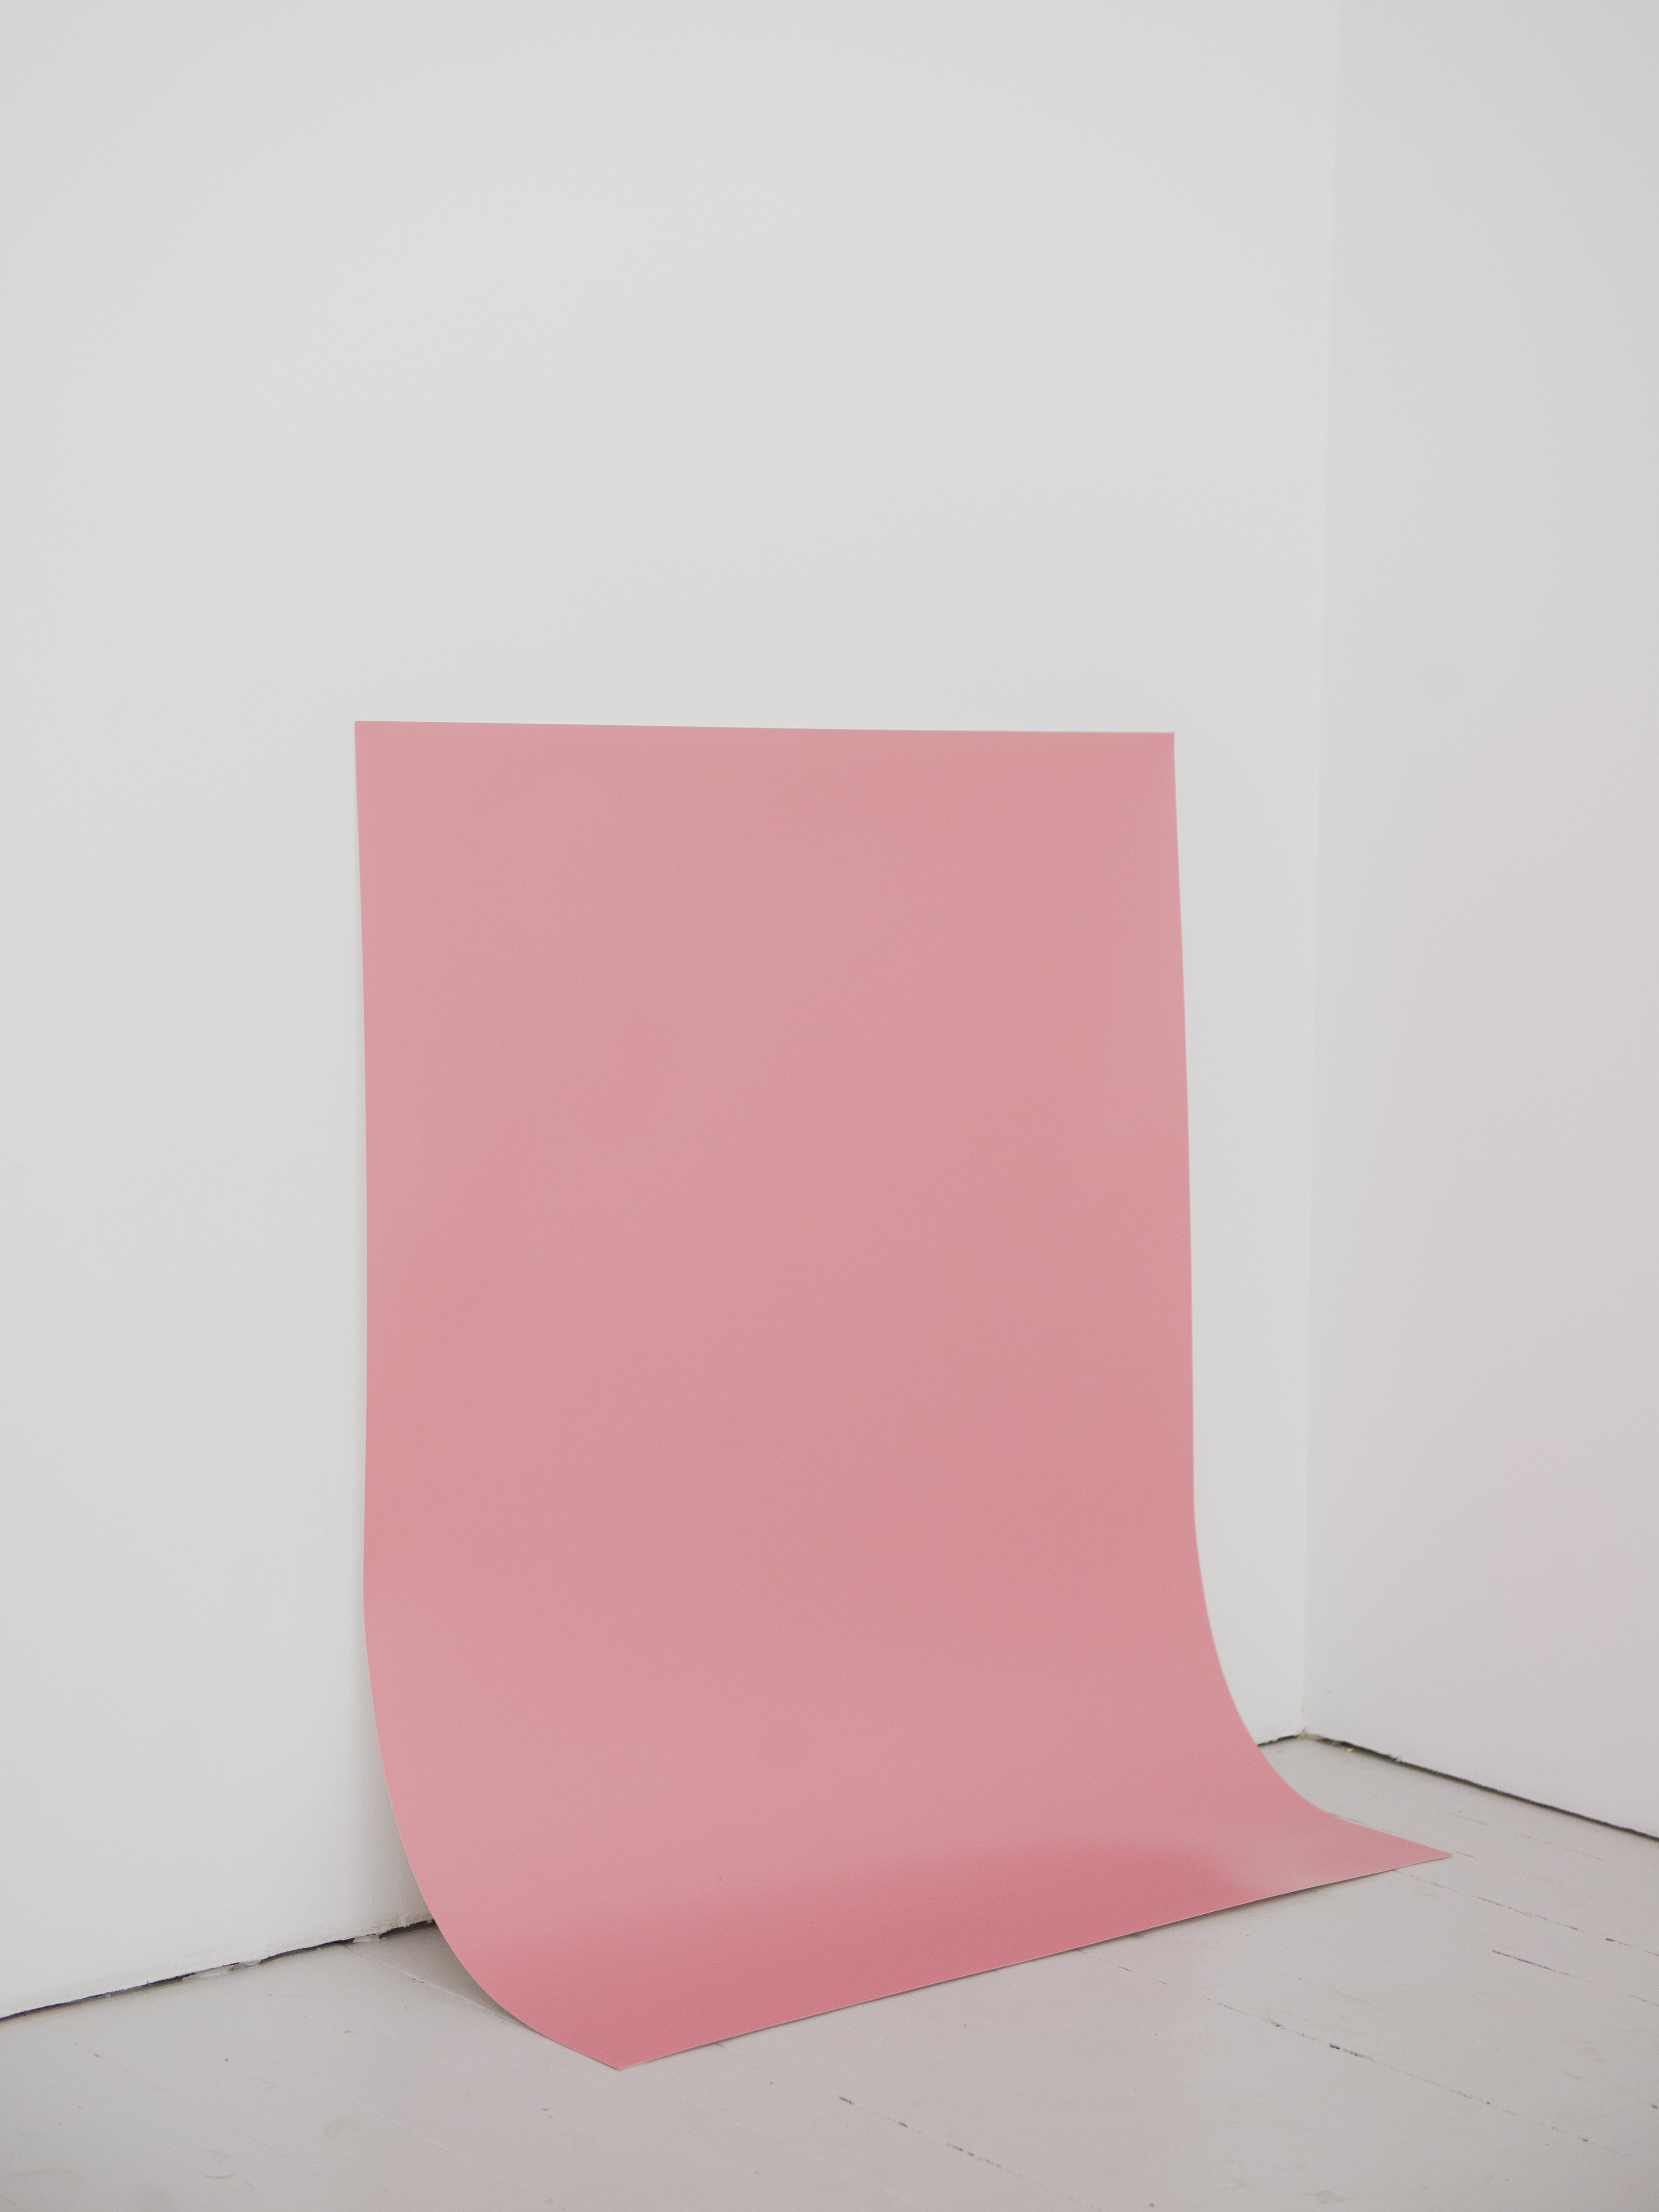 Untitled (2016), Undeveloped chromogenic photo paper exposed to light at Podium 100x70, from a series of 9, ph Ayat Gali